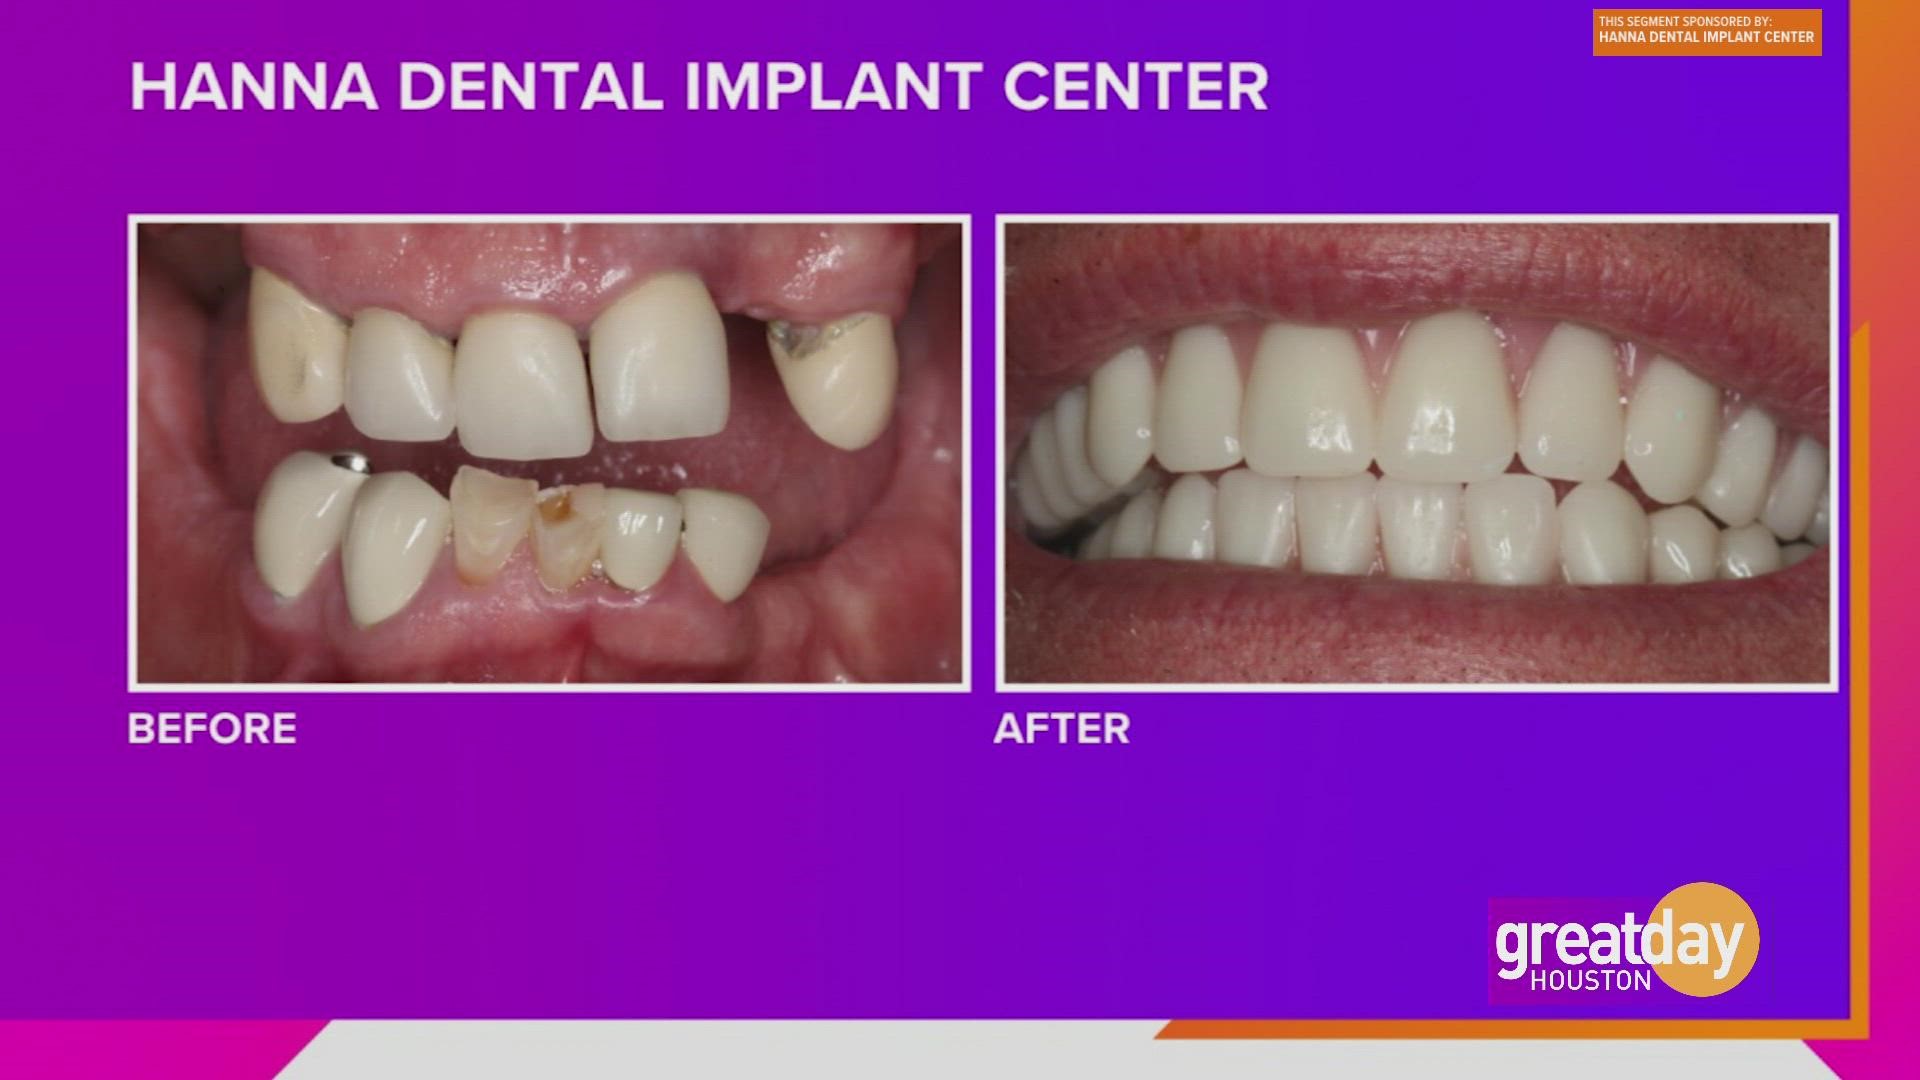 Makeover your smile with Dr. Raouf Hanna of Hanna Dental Implant Center